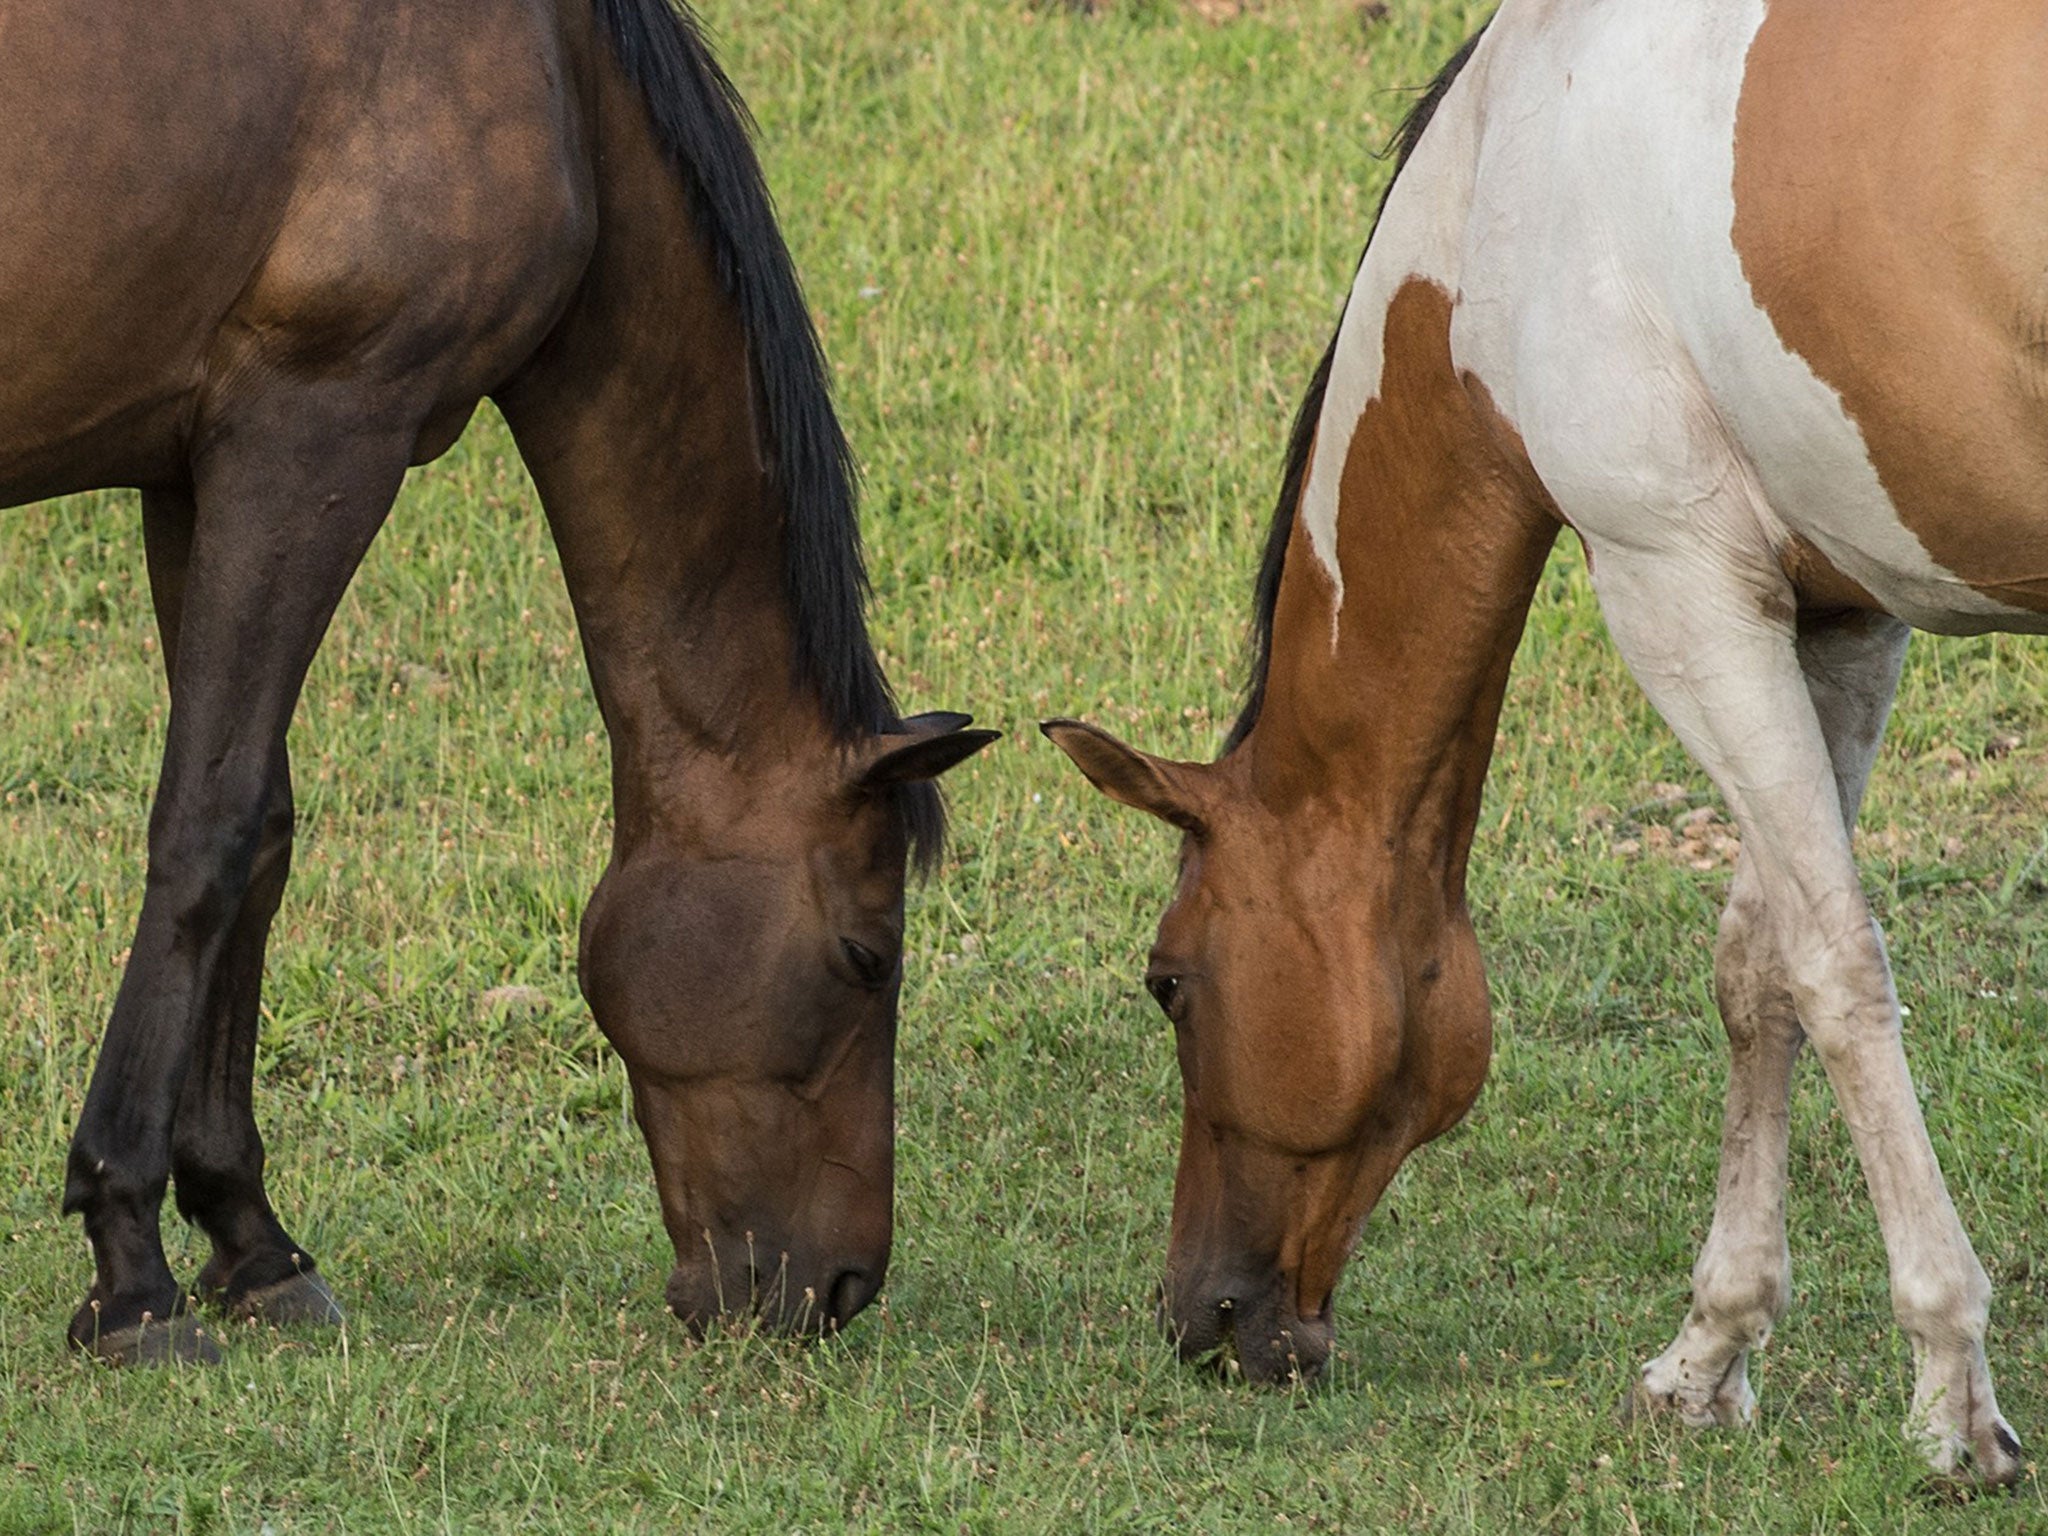 Two horses graze in America. Landmark rulings in Oregon will see the creatures treated as victims in court cases